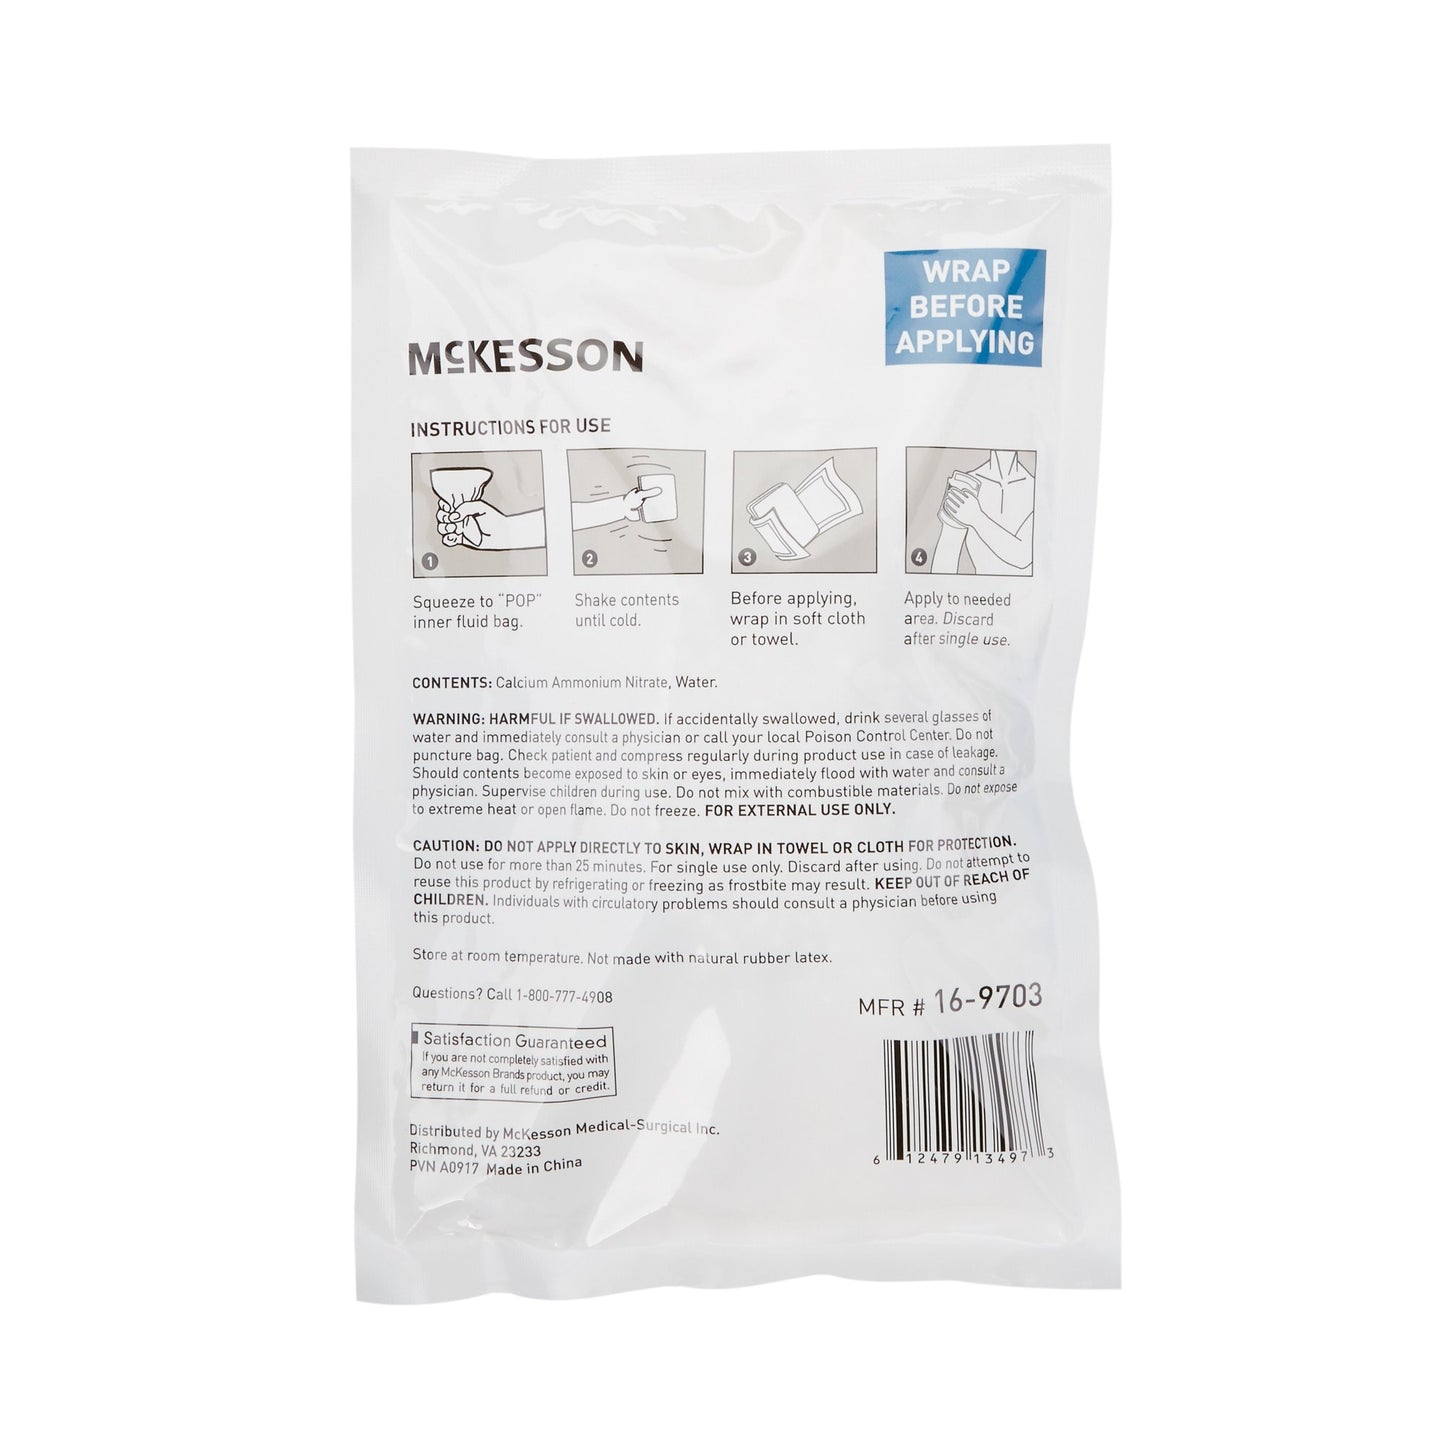 McKesson Instant Cold Pack, 6 x 9 Inch